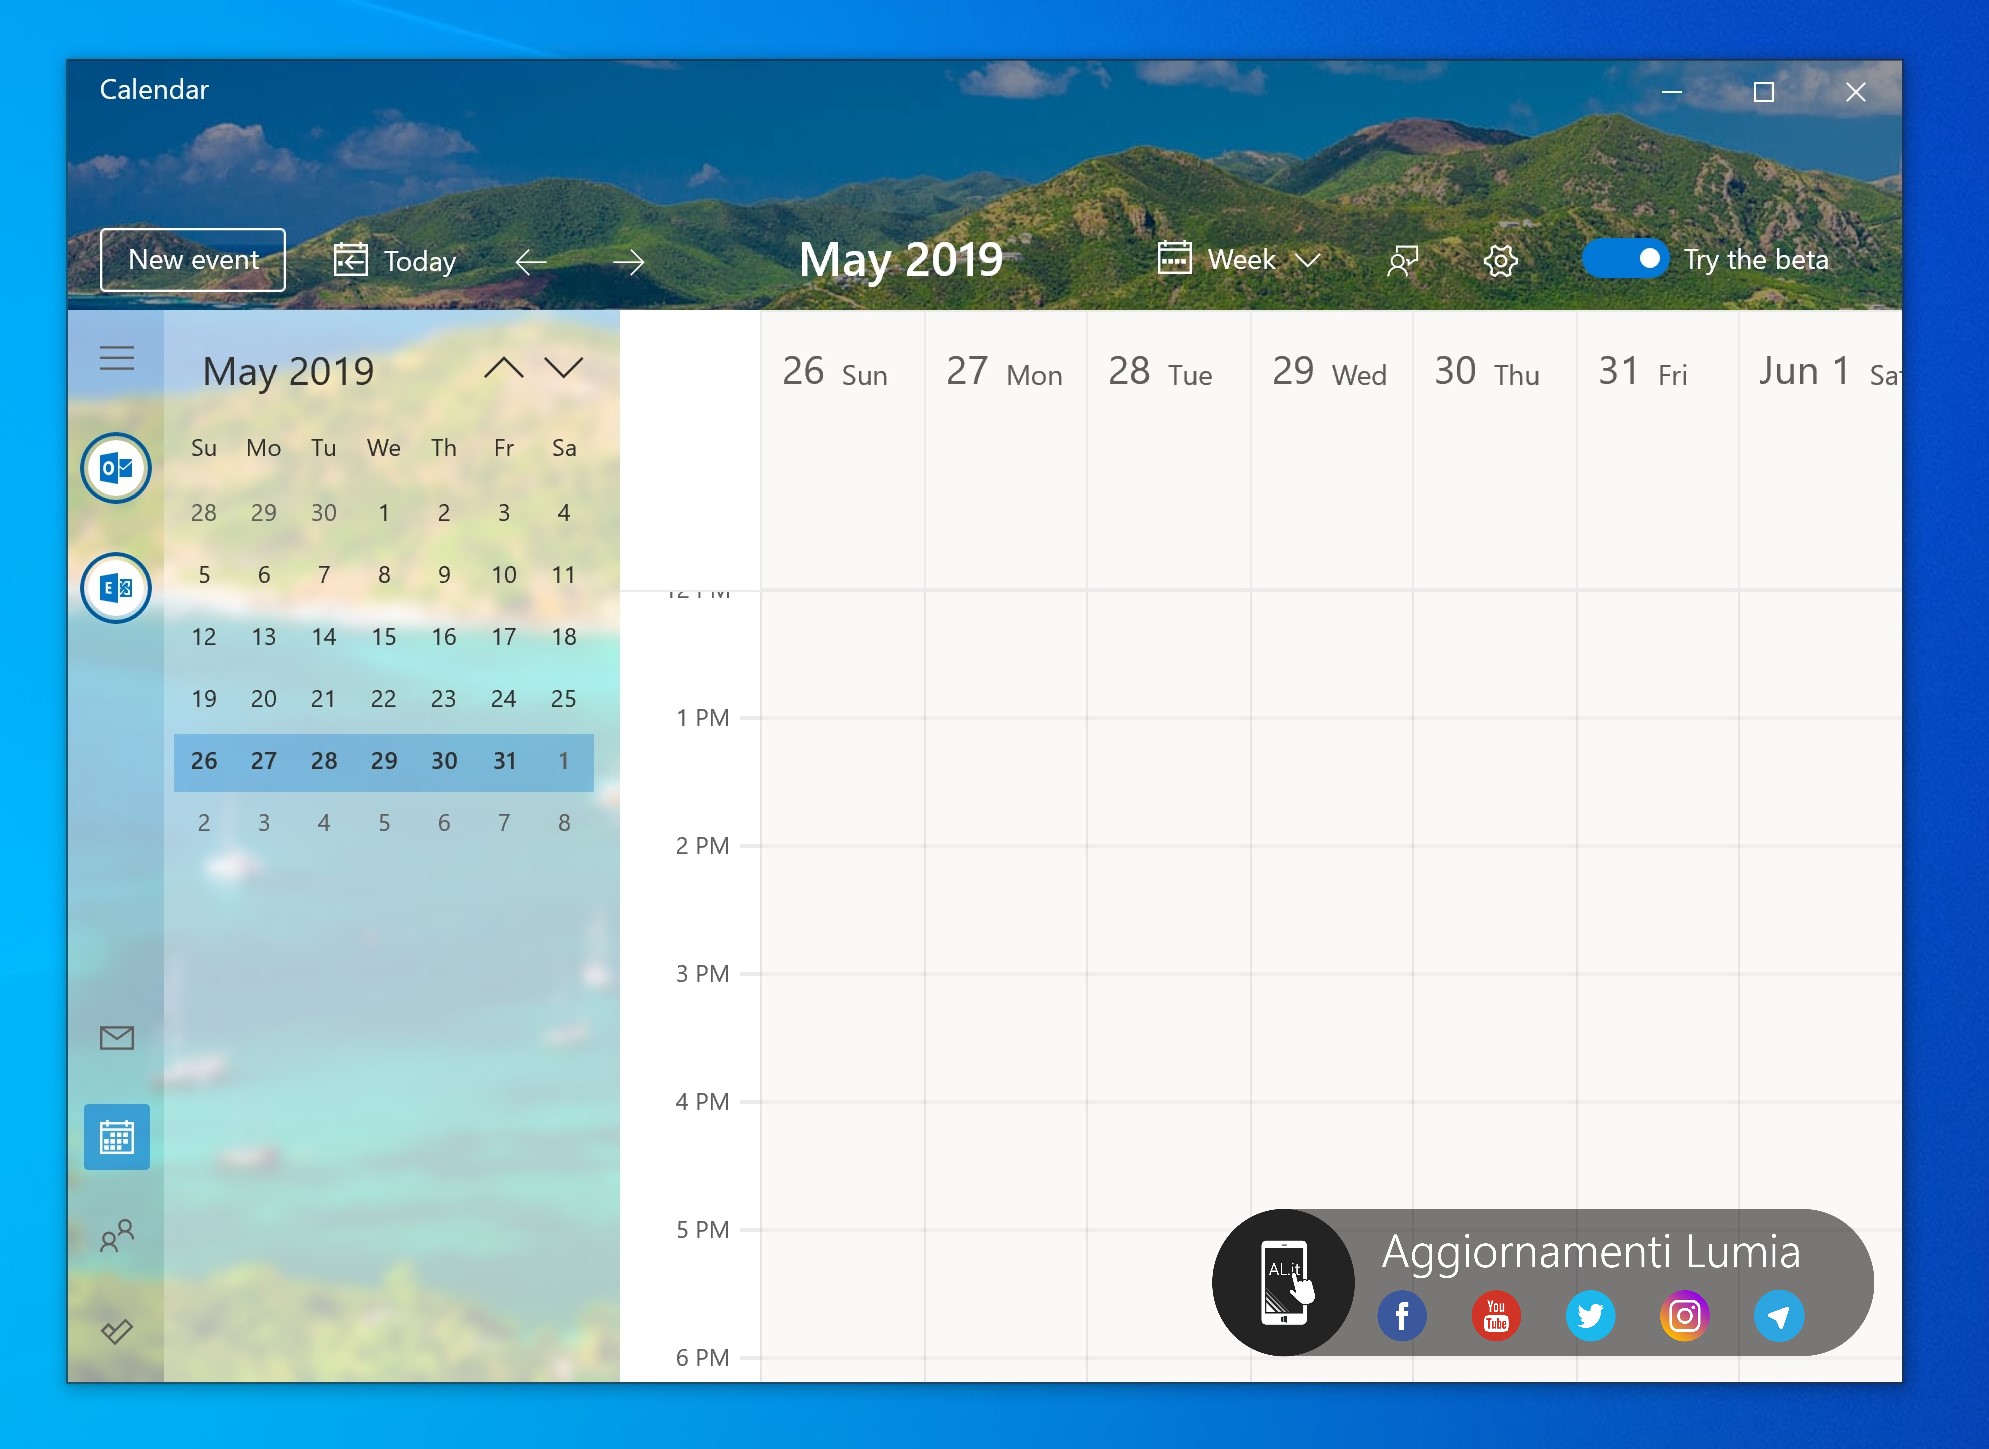 This is microsoft s reinvented calendar app for windows 10 527382 2